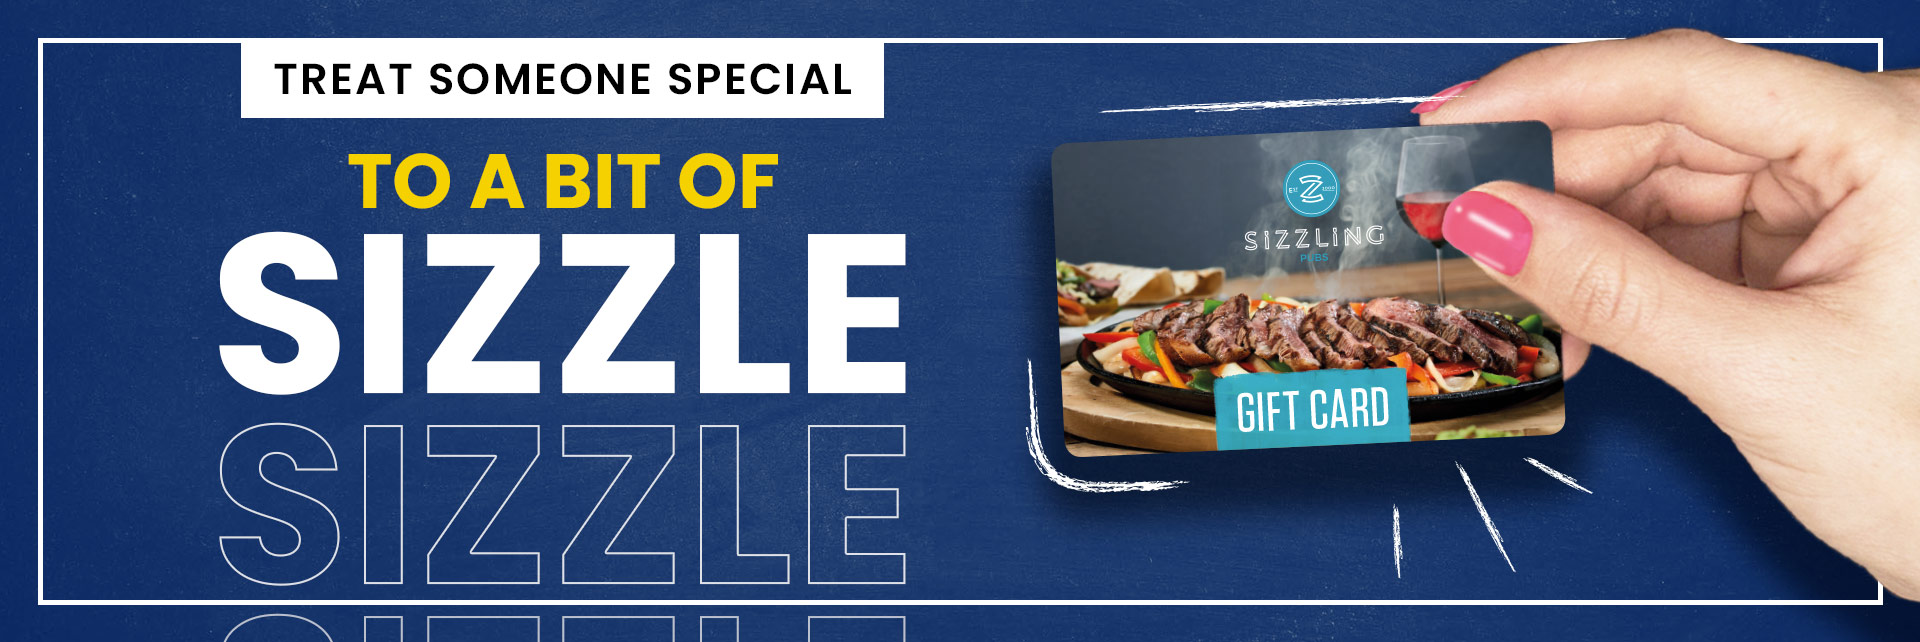 Sizzling Pubs Gift Card at Halfway House in Liverpool